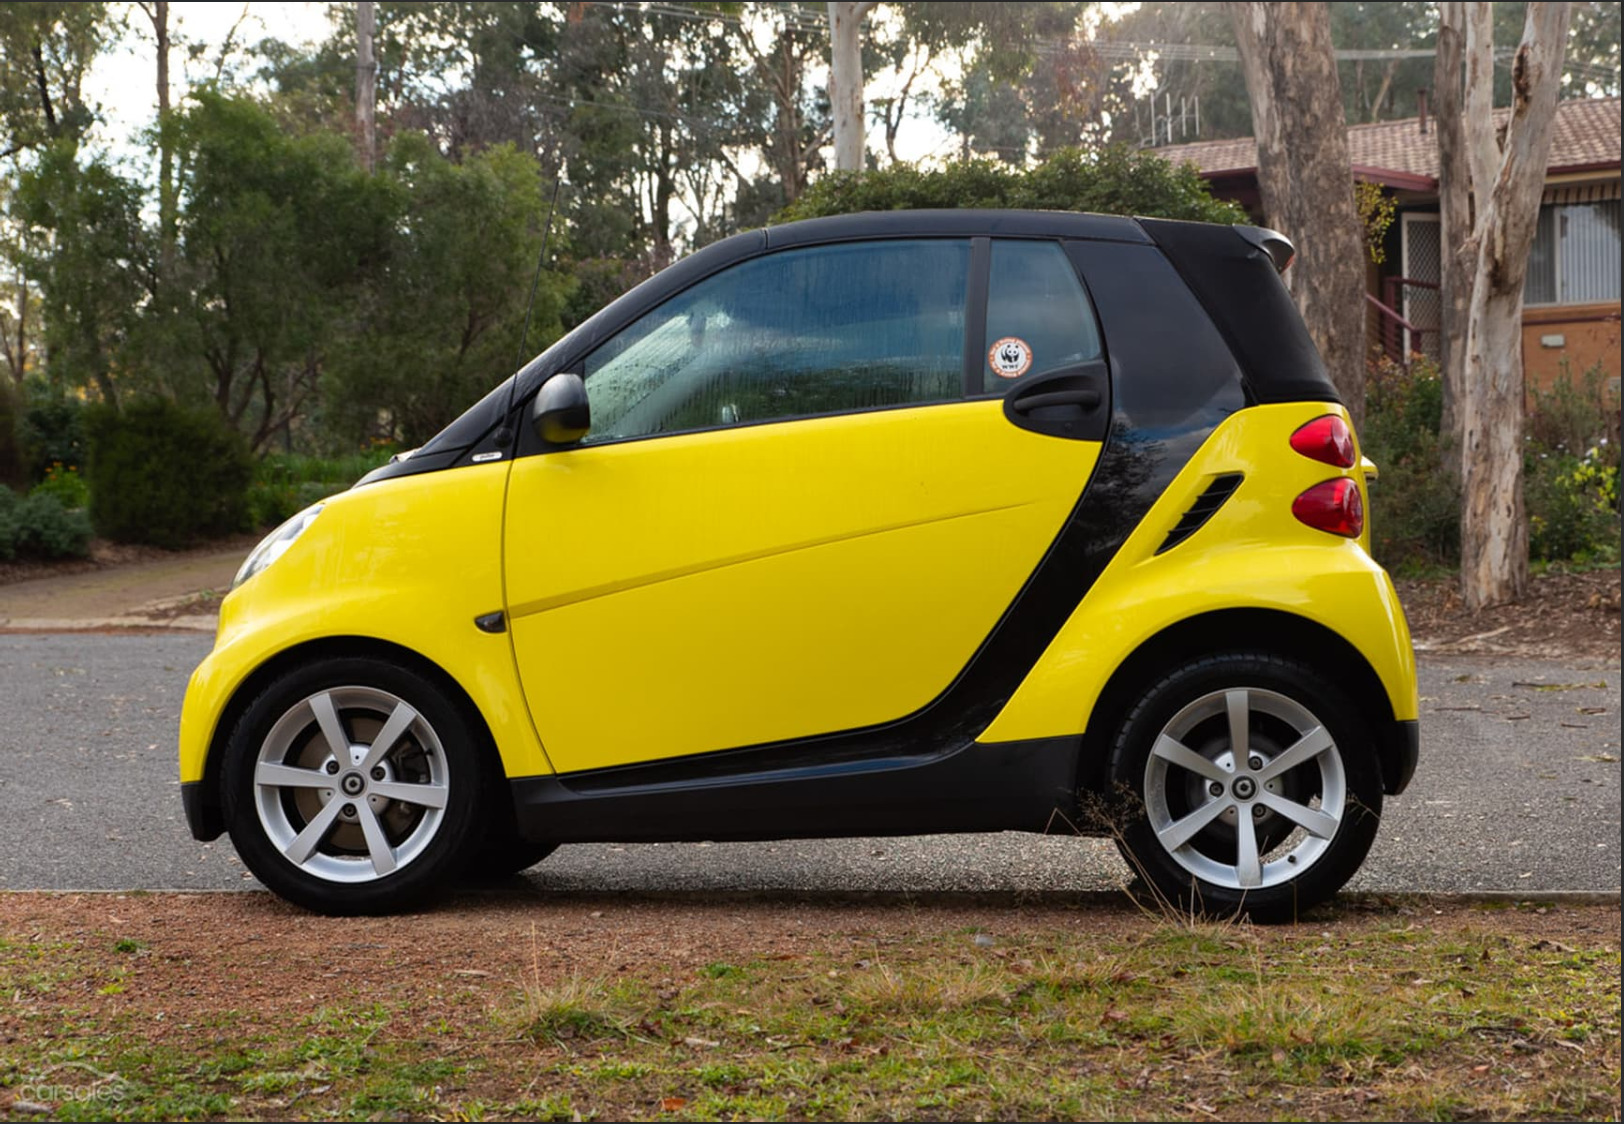 Smart Fortwo convertible yellow great looking car – Star Cars Agency